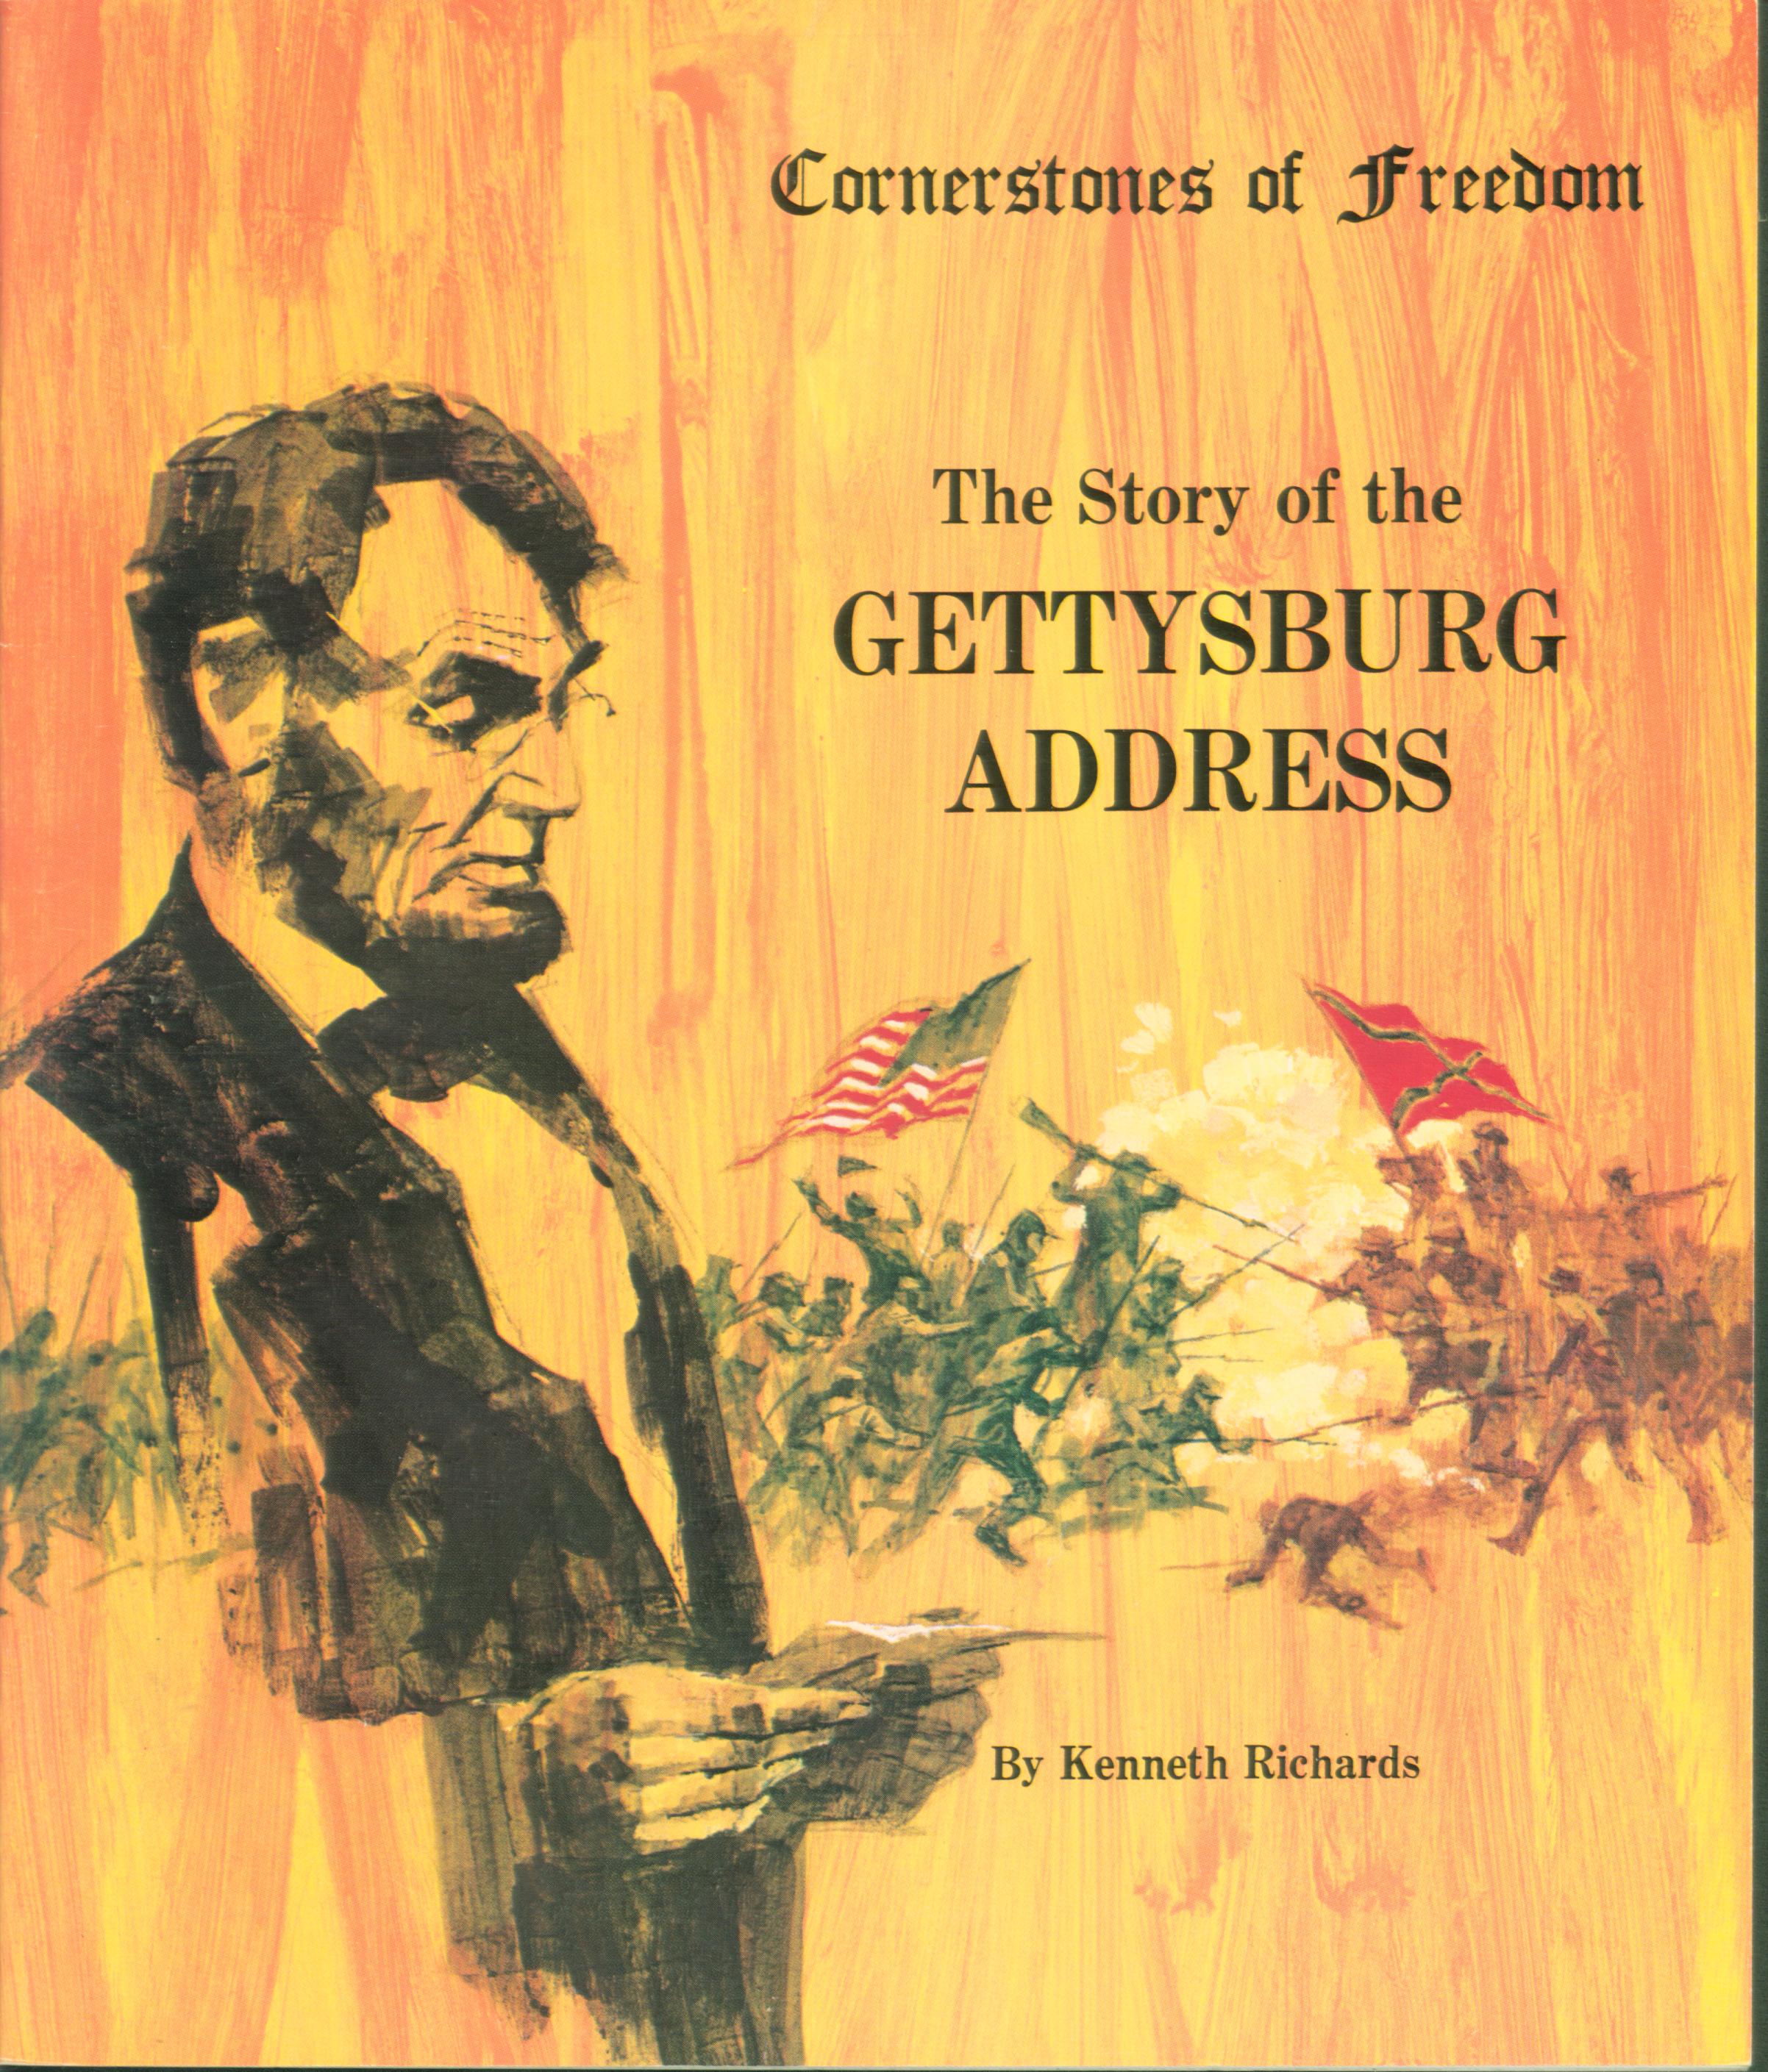 THE STORY OF THE GETTYSBURG ADDRESS. 